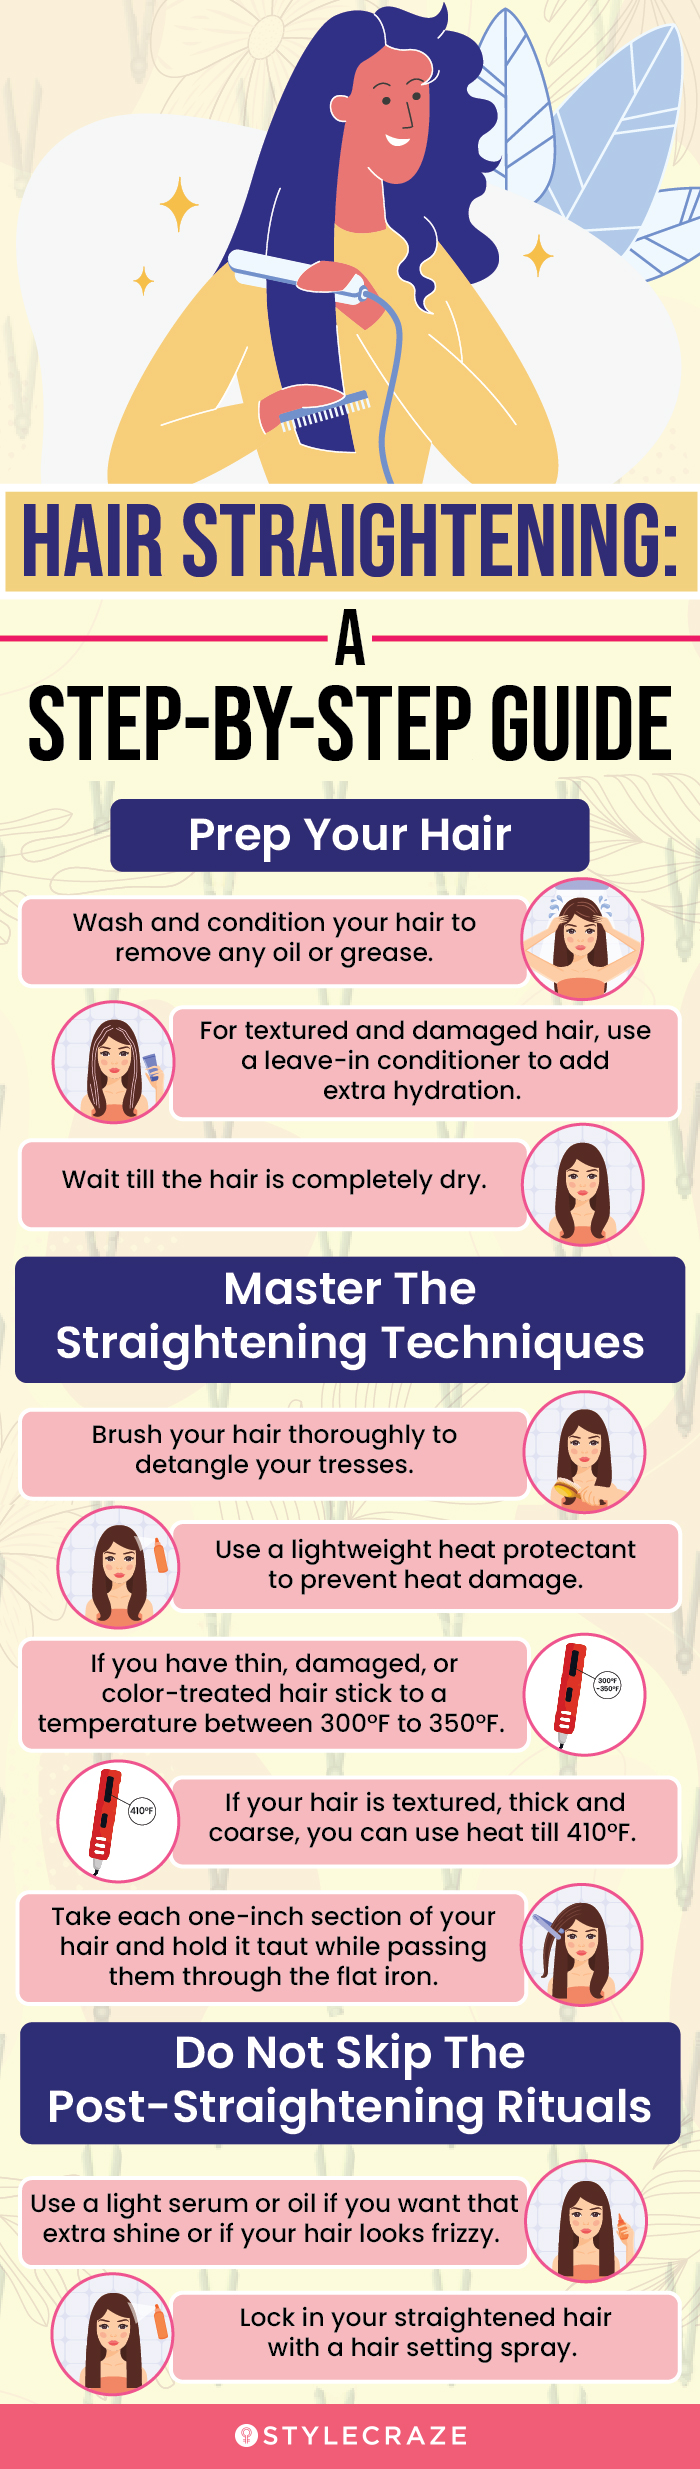 Hair Straightening: A Step-By-Step Guide [infographic]